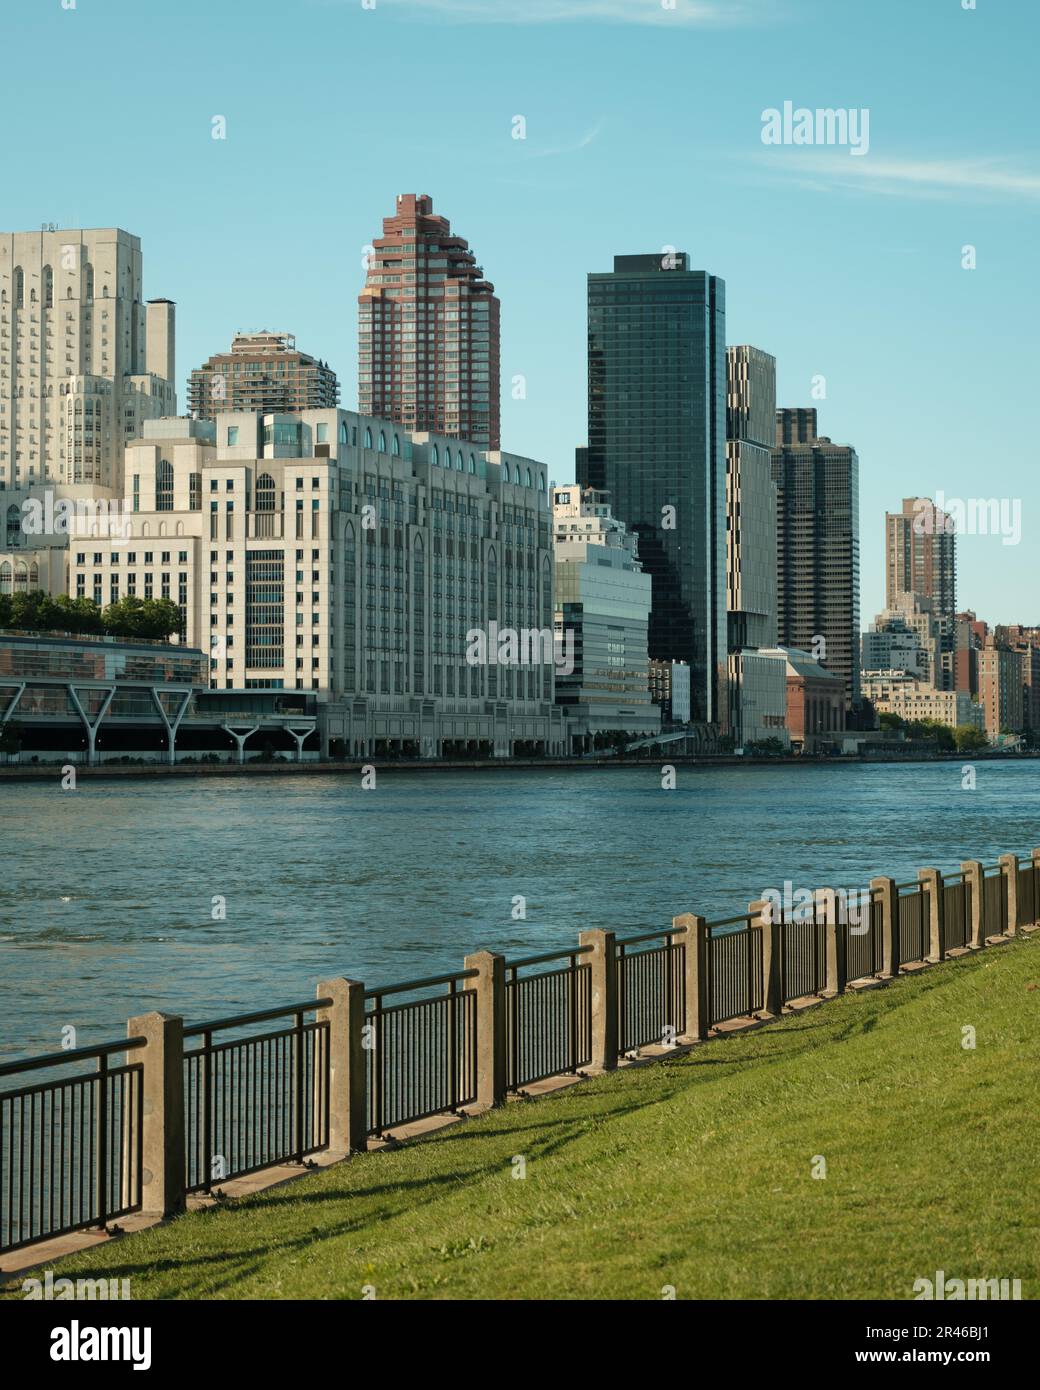 View of the East River and buildings in Manhattan from Roosevelt Island, New York City Stock Photo